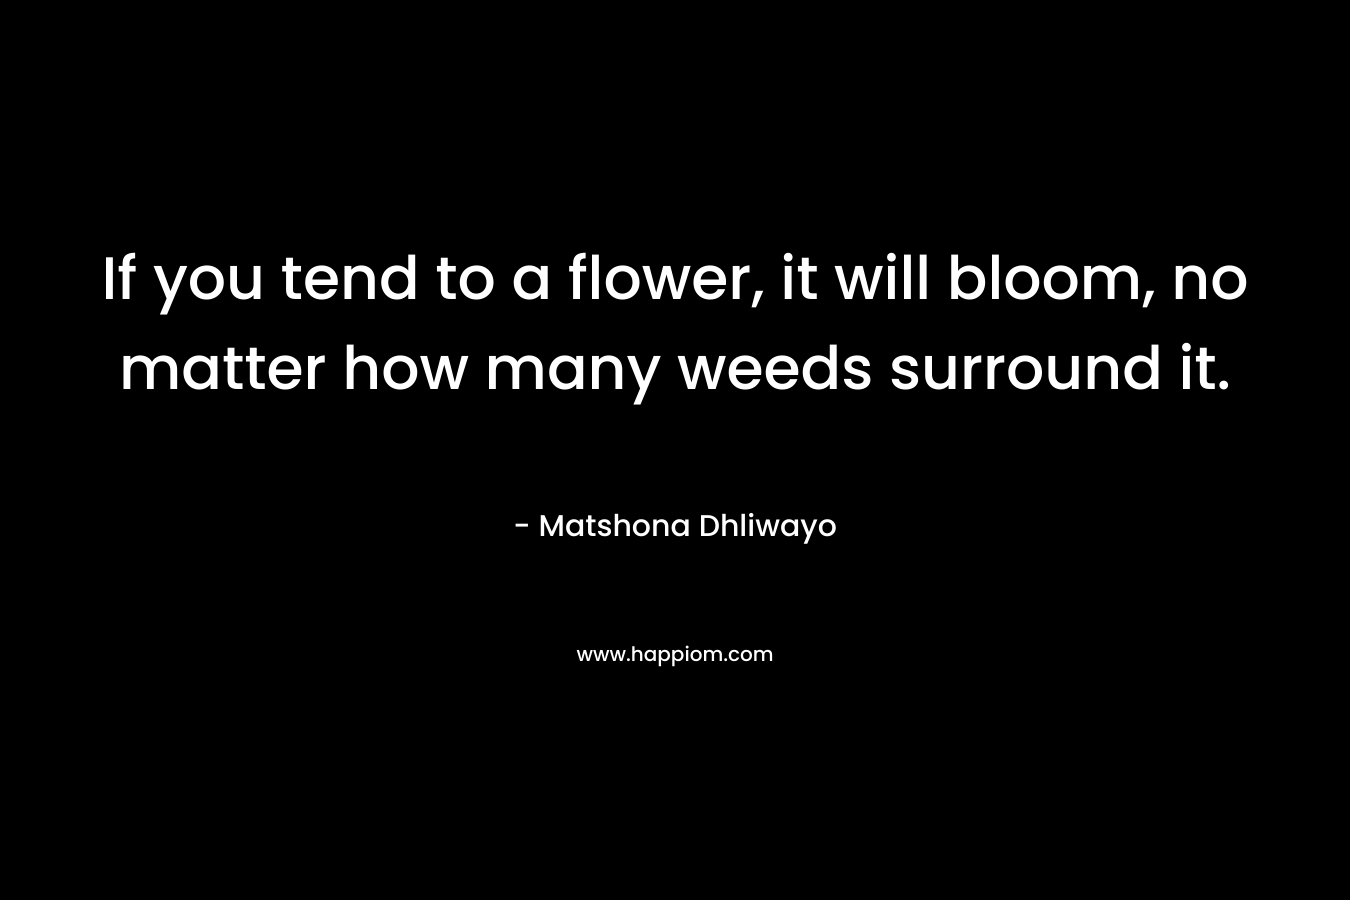 If you tend to a flower, it will bloom, no matter how many weeds surround it. – Matshona Dhliwayo